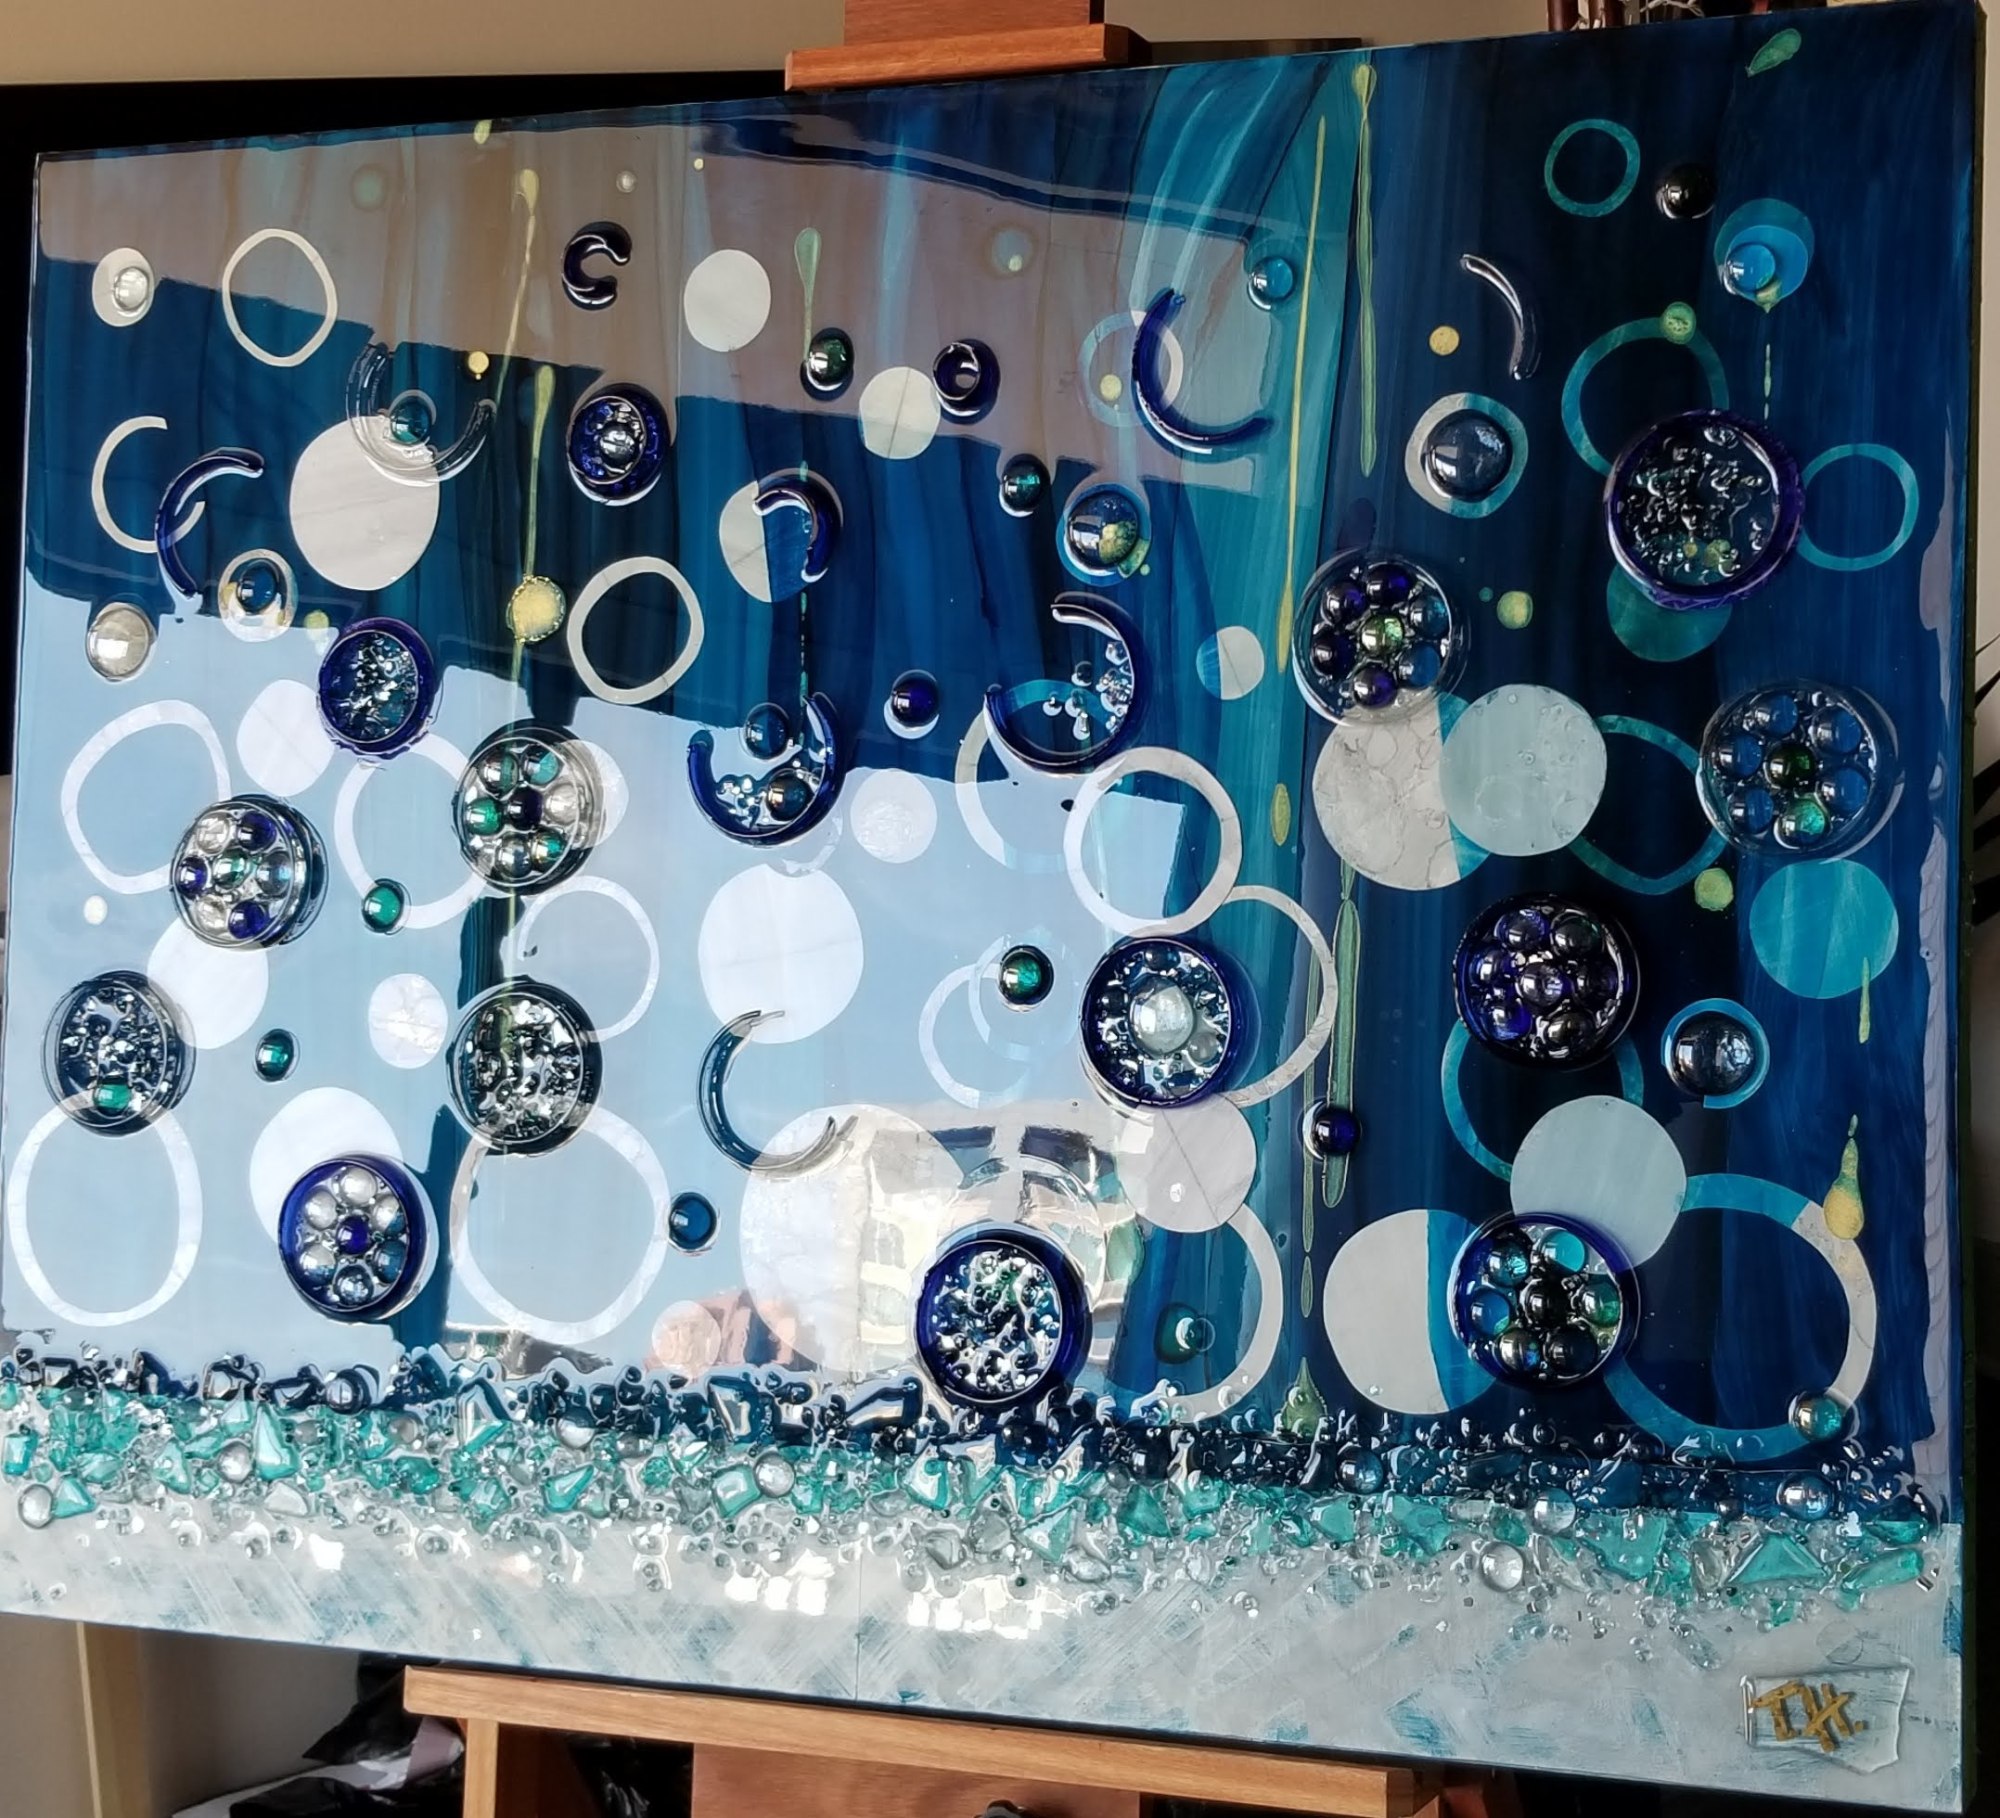 Lavender & Lilac Bling Resin + Glass Art on Wood Panel by Tana Hensley